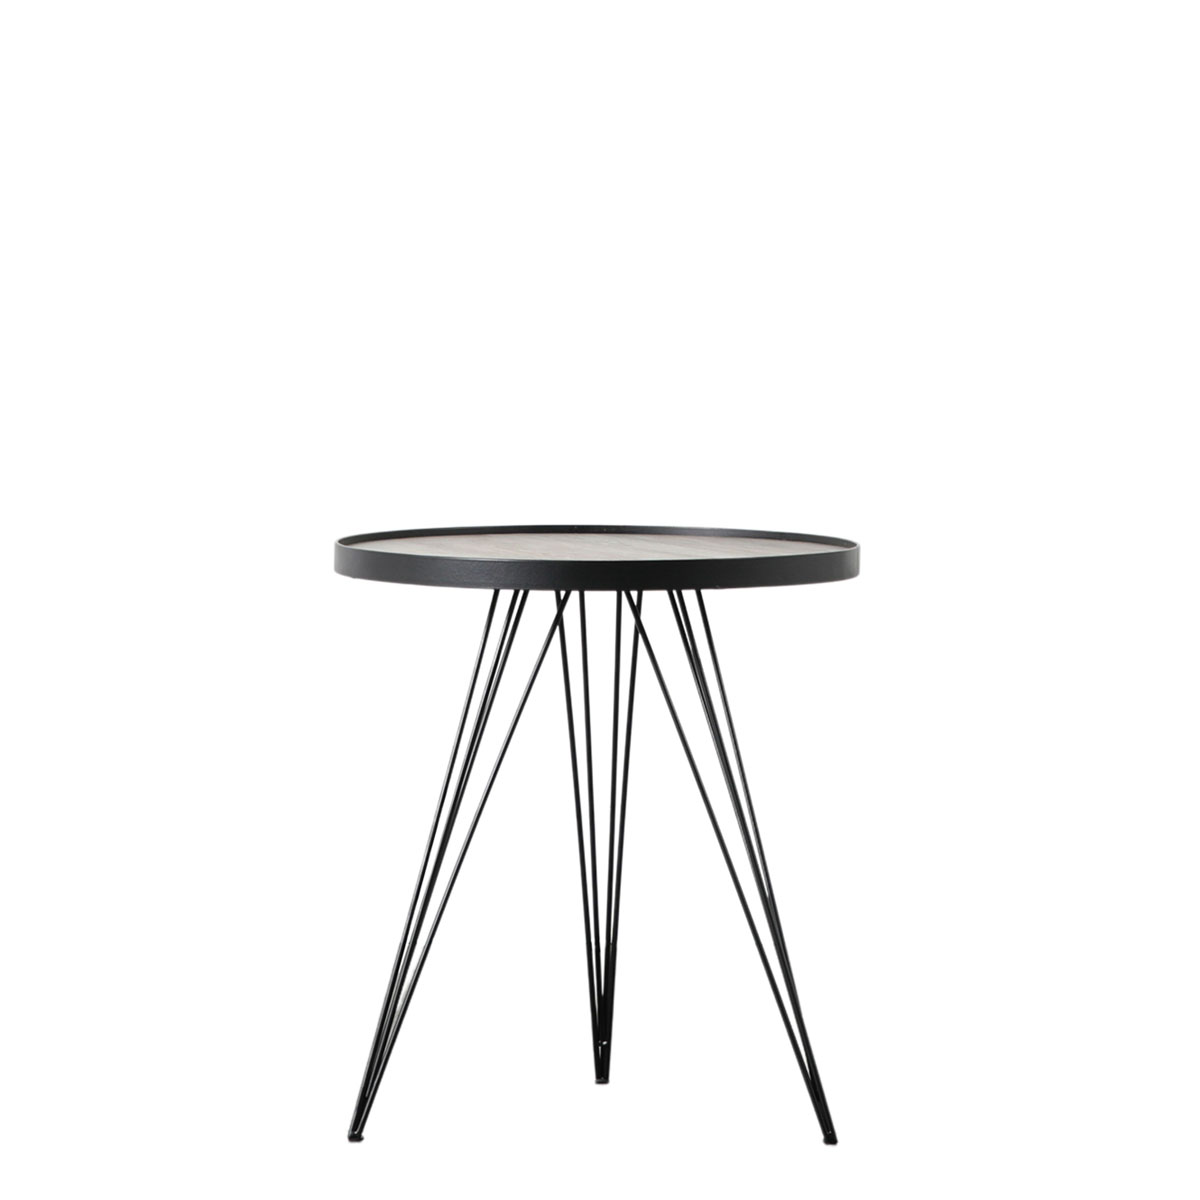 Tufnell Side Table 500x500x560mm